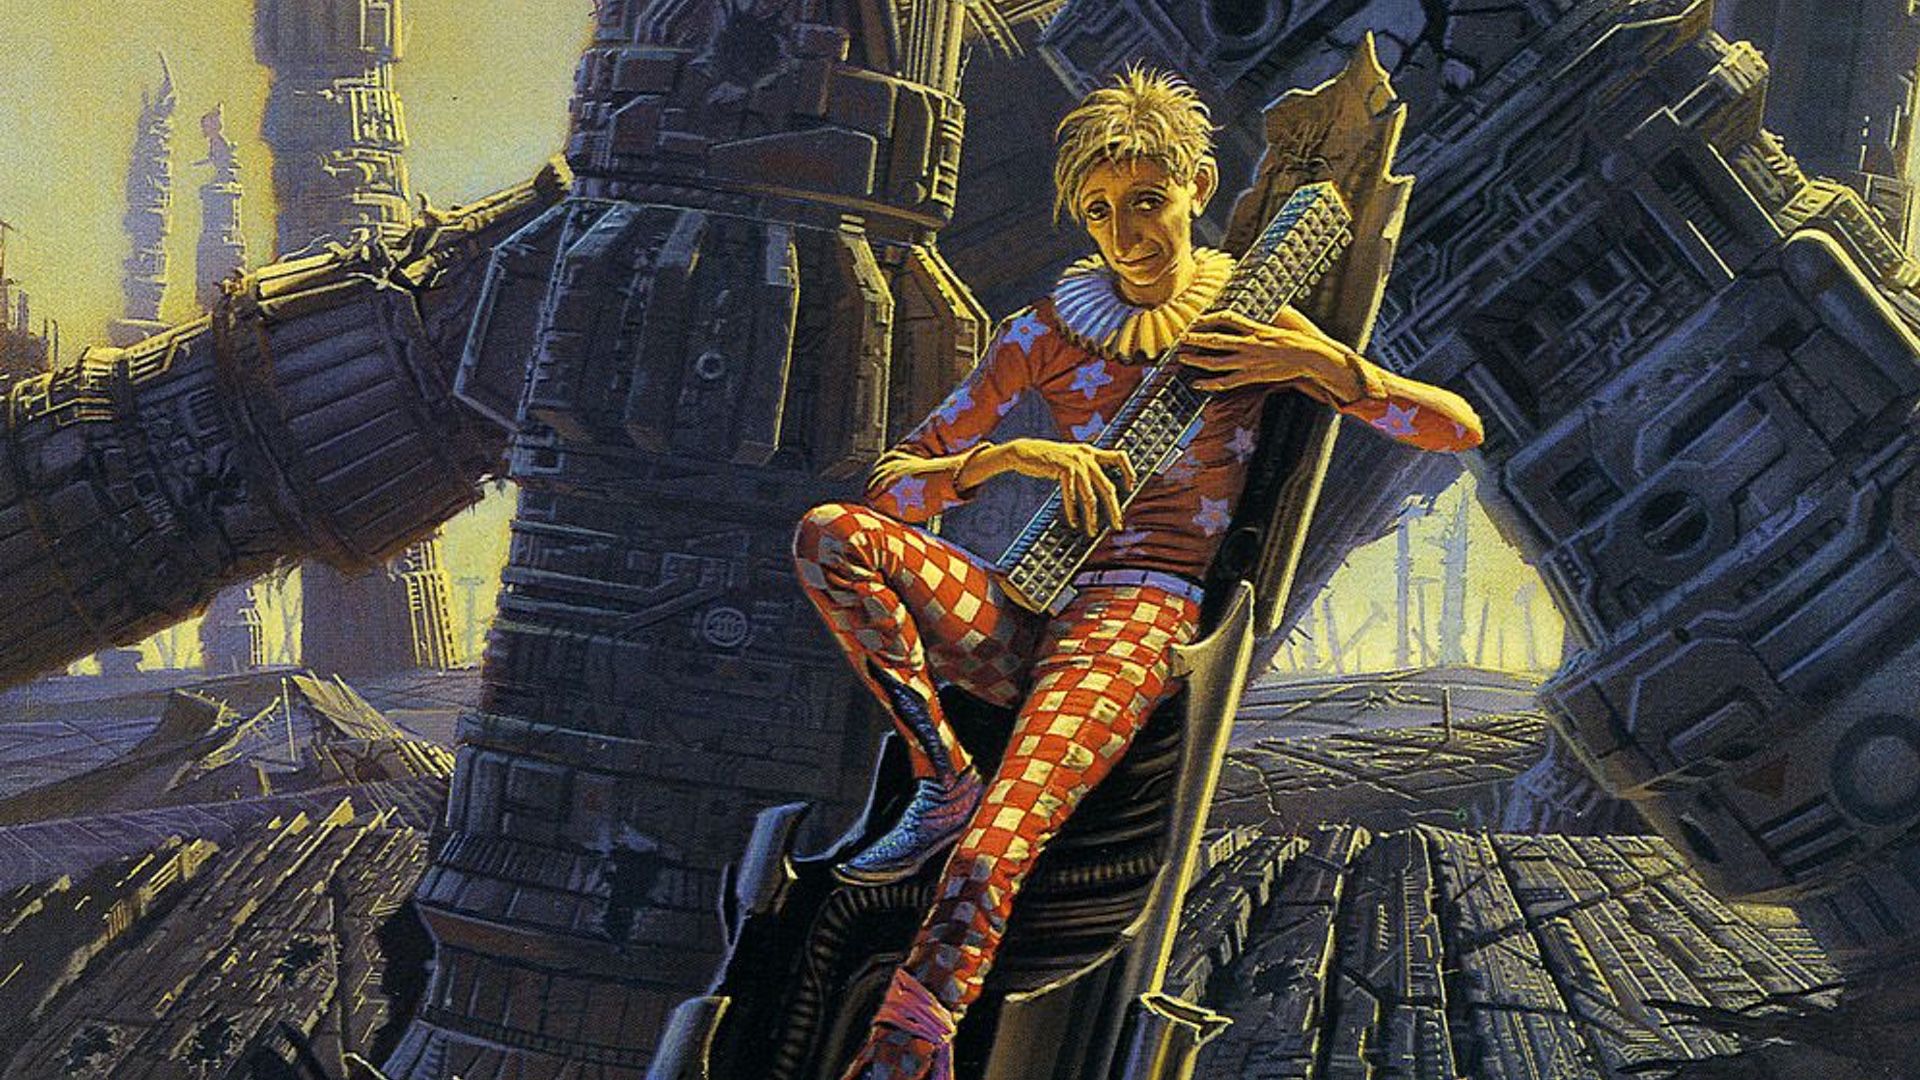 David S. Goyer's Series Adaptation of Isaac Asimov's FOUNDATION Ordered By Apple